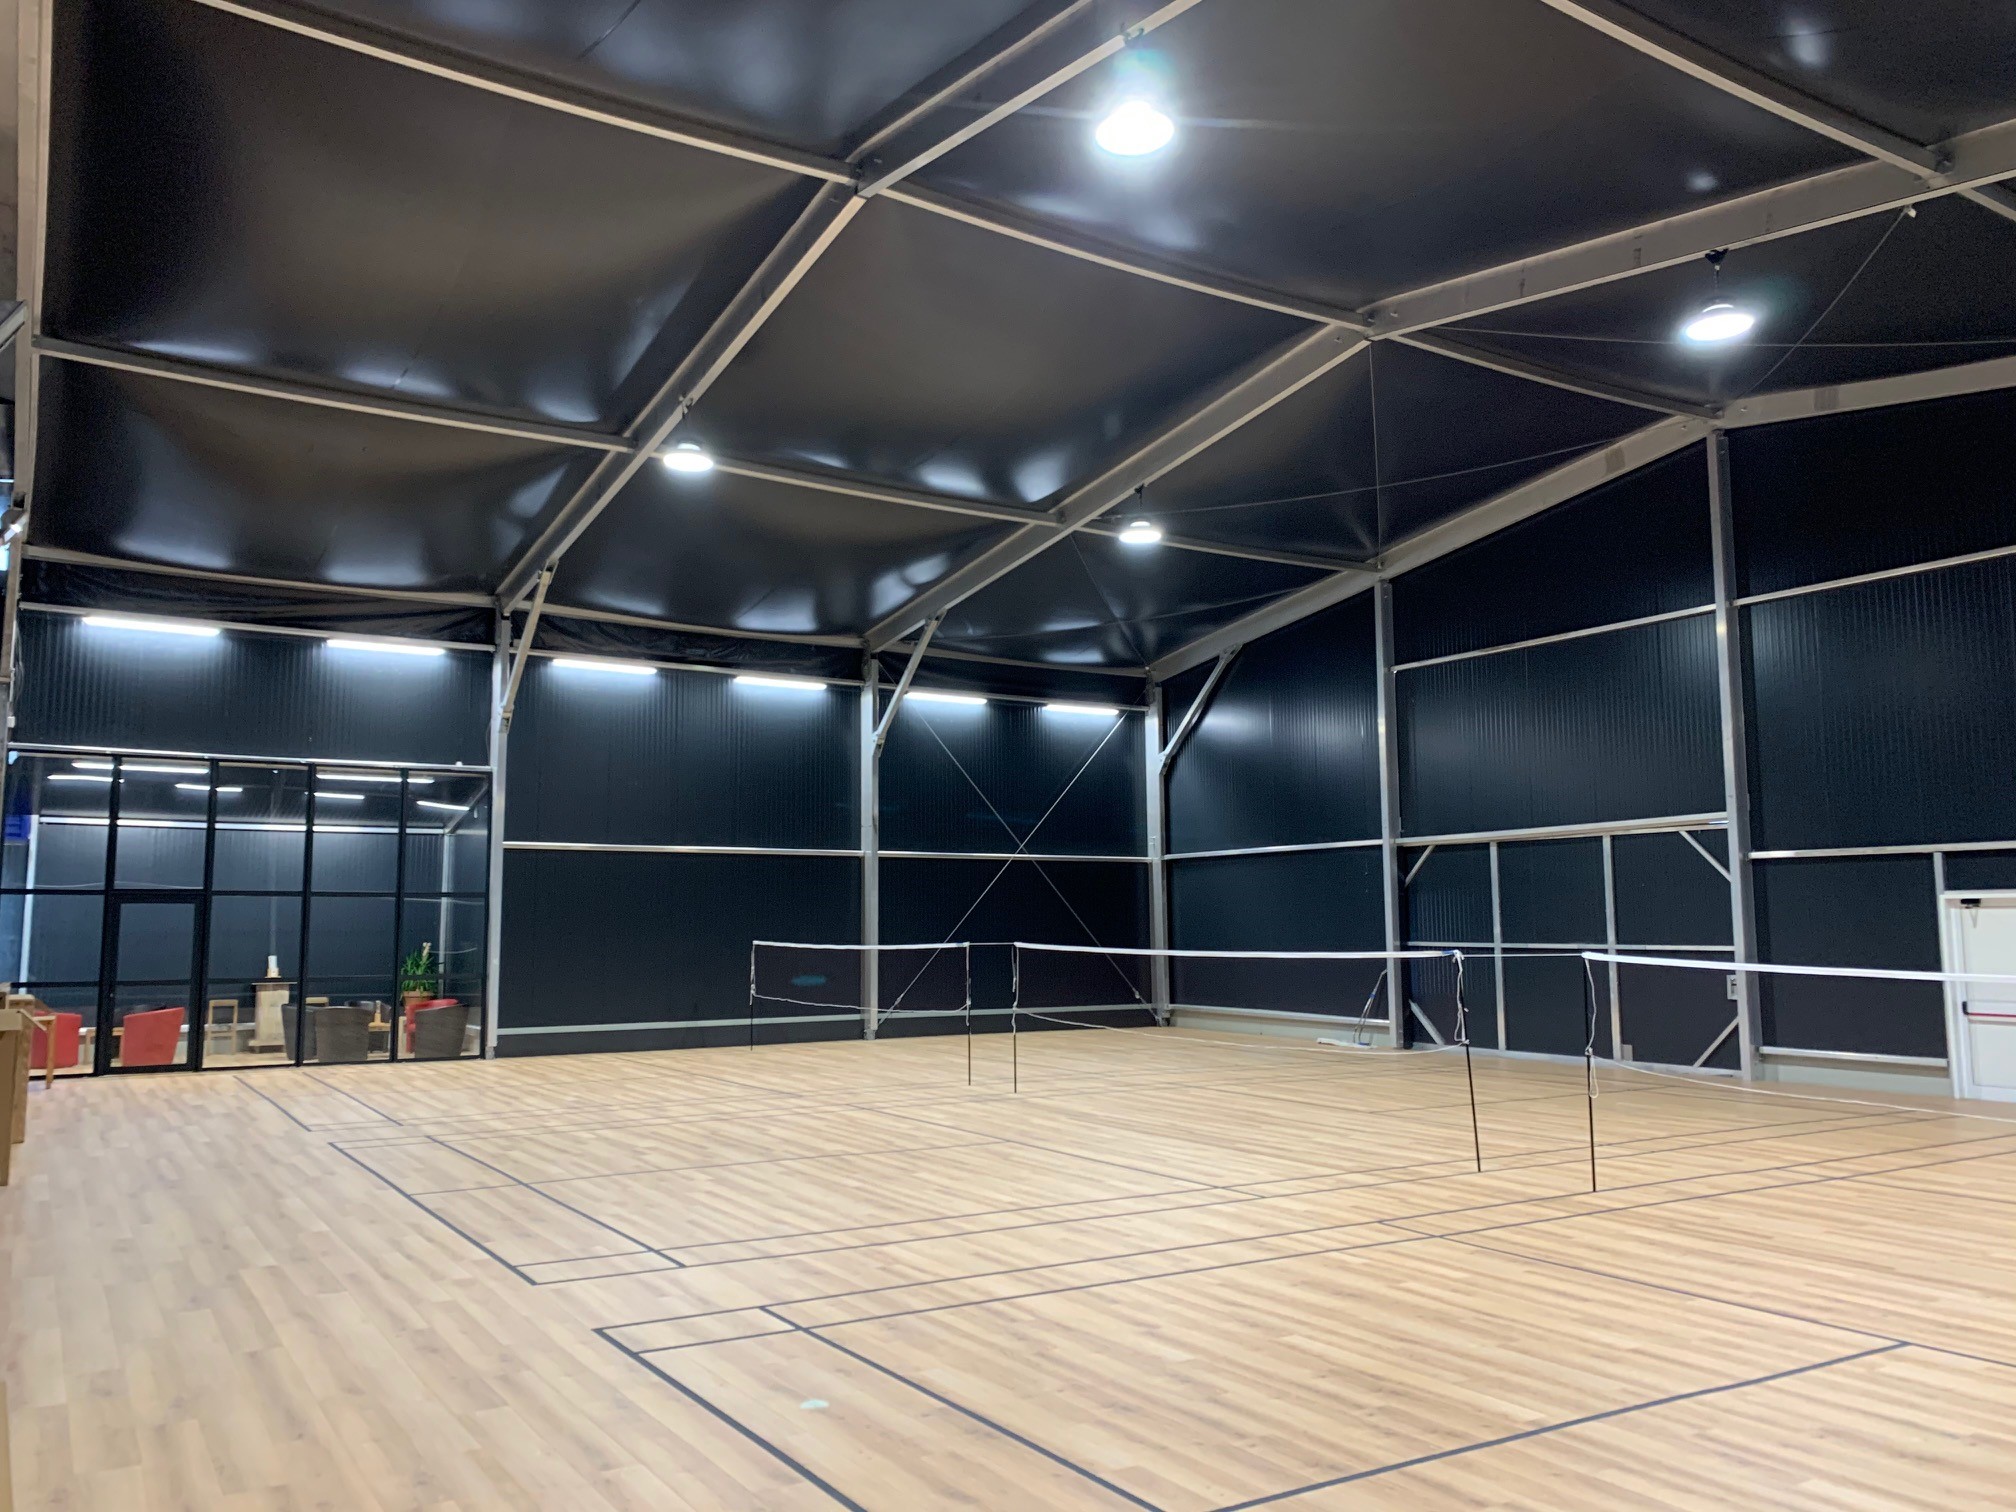 Lauralu insulated temporary buildings for sports courts